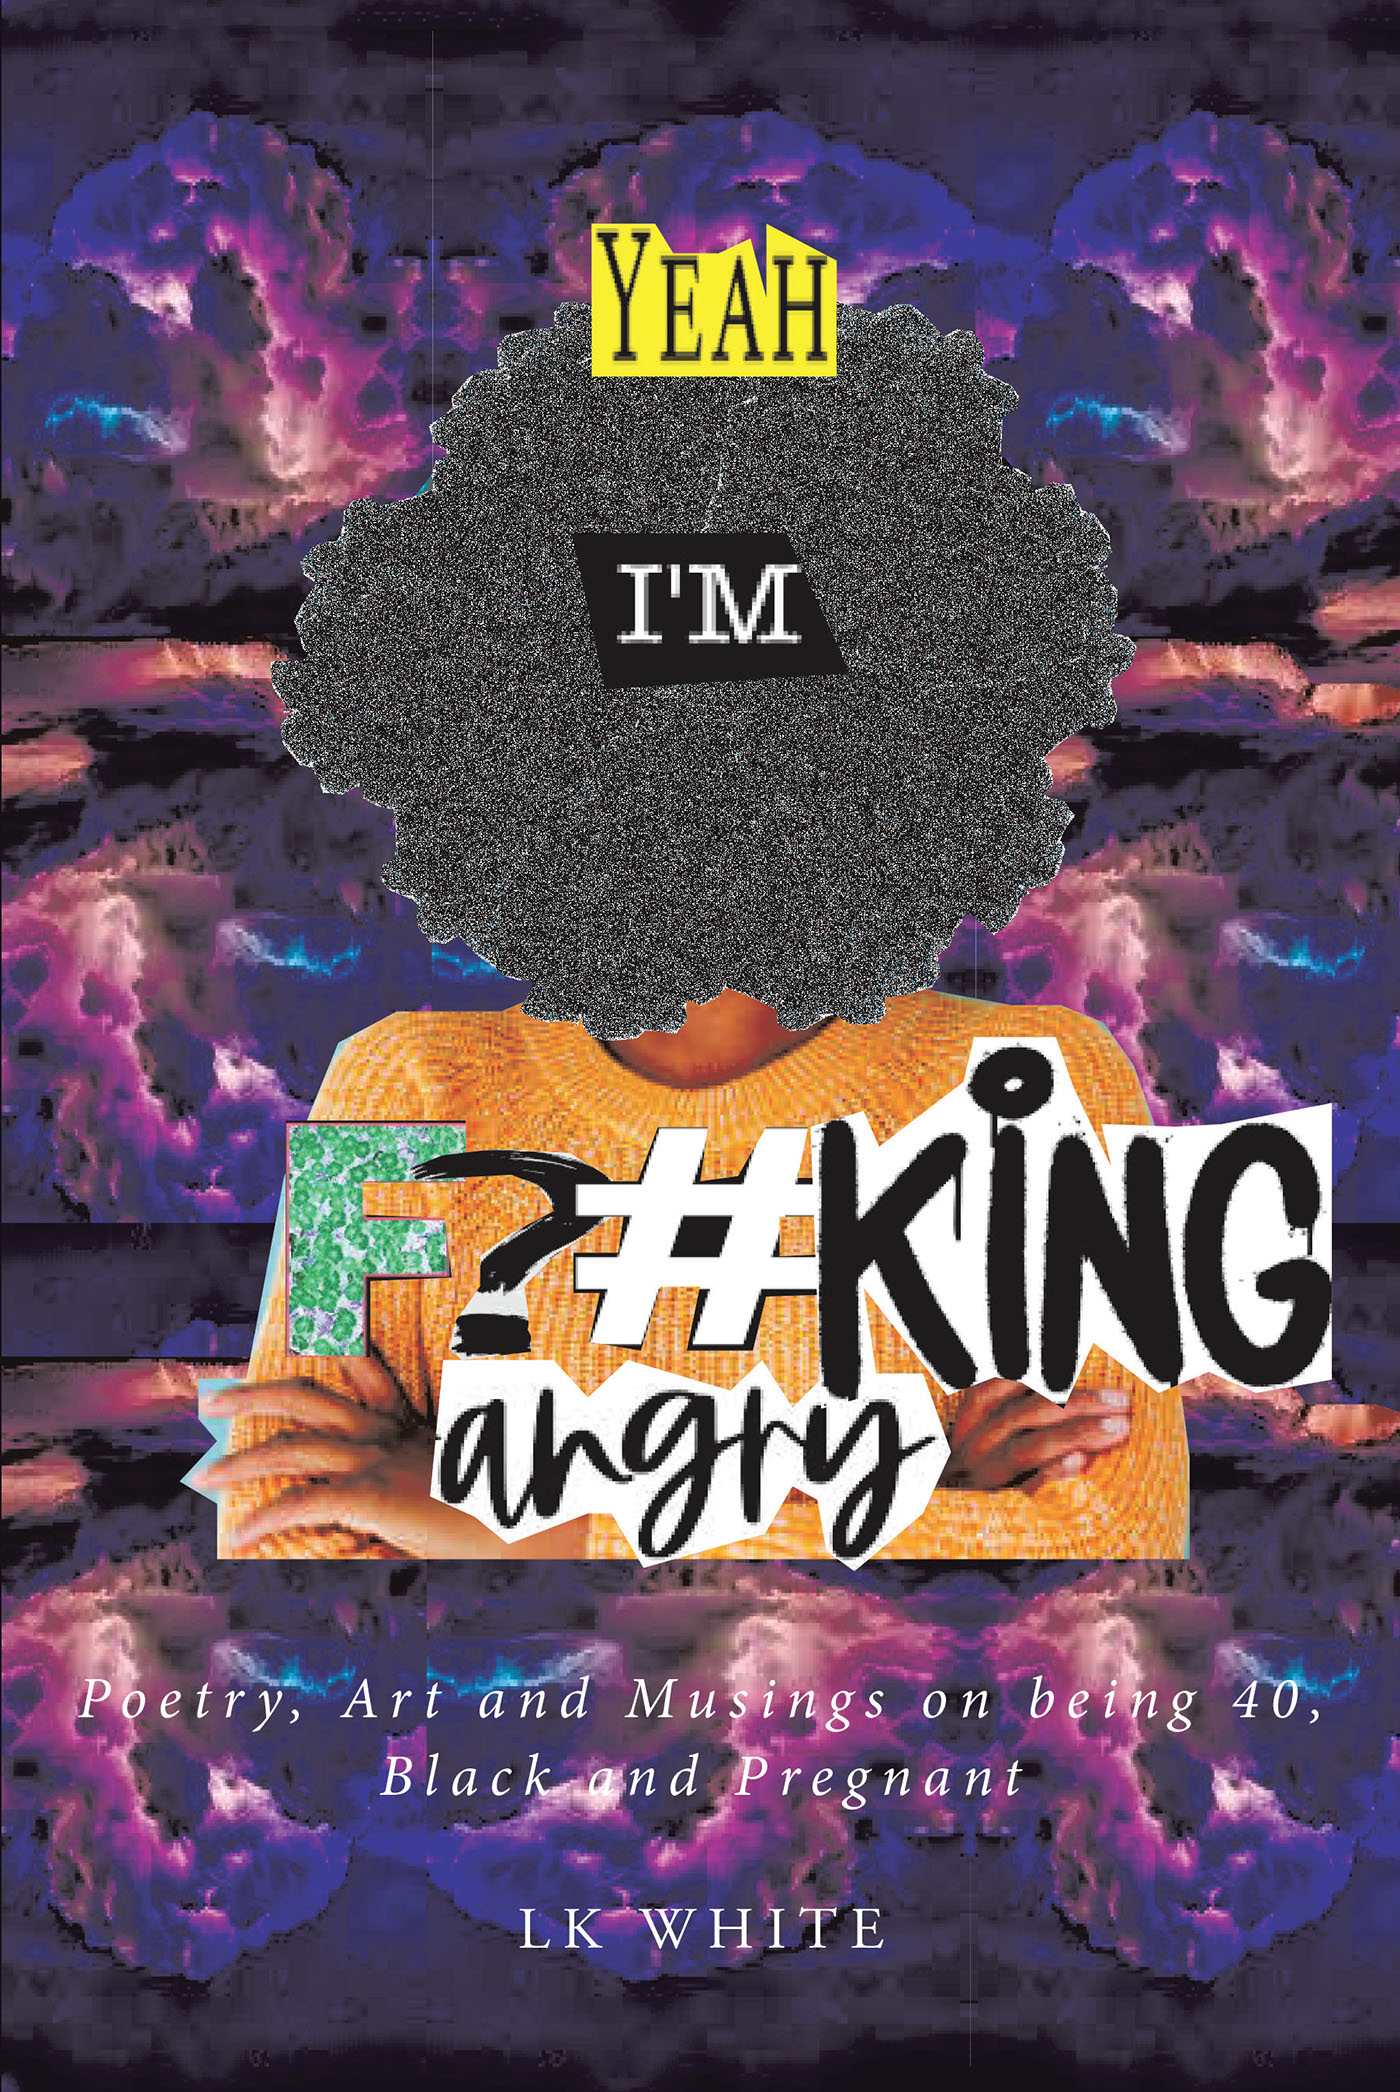 LK White’s New Book, “Yeah I'm F?#king Angry,” is a Series of Poetry and Art Revealing the Author’s Treatment She Experienced Working While Pregnant & After Giving Birth